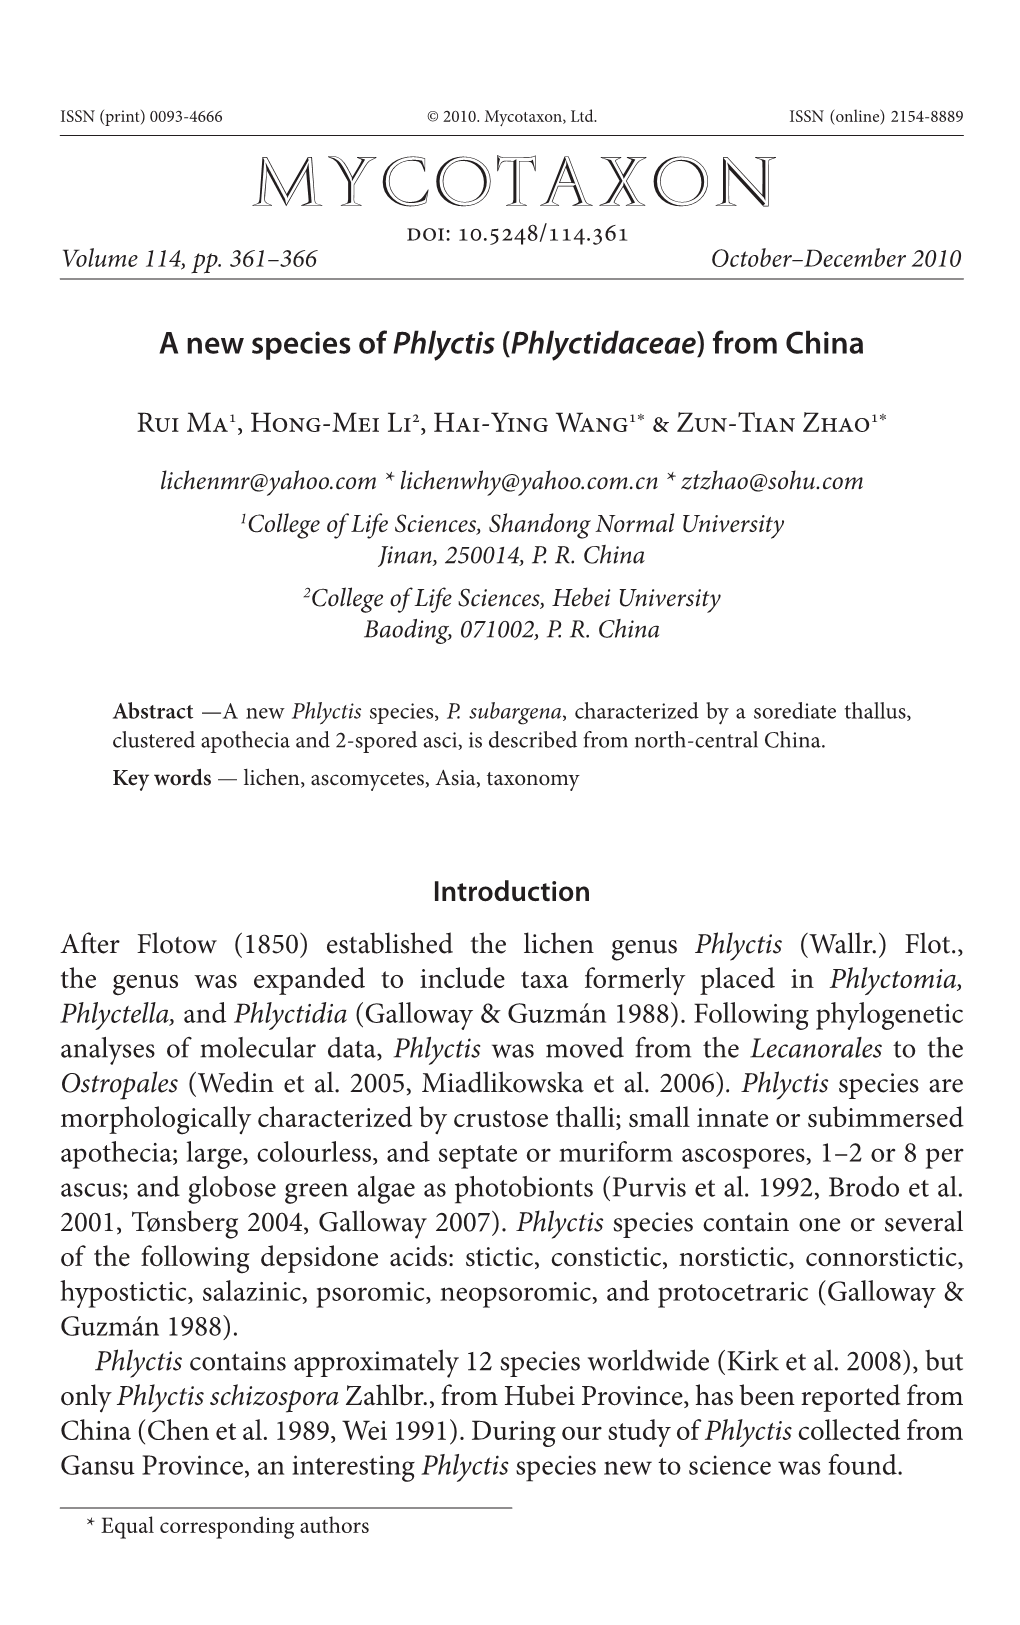 A New Species of &lt;I&gt;Phlyctis&lt;/I&gt; (&lt;I&gt;Phlyctidaceae&lt;/I&gt;) from China